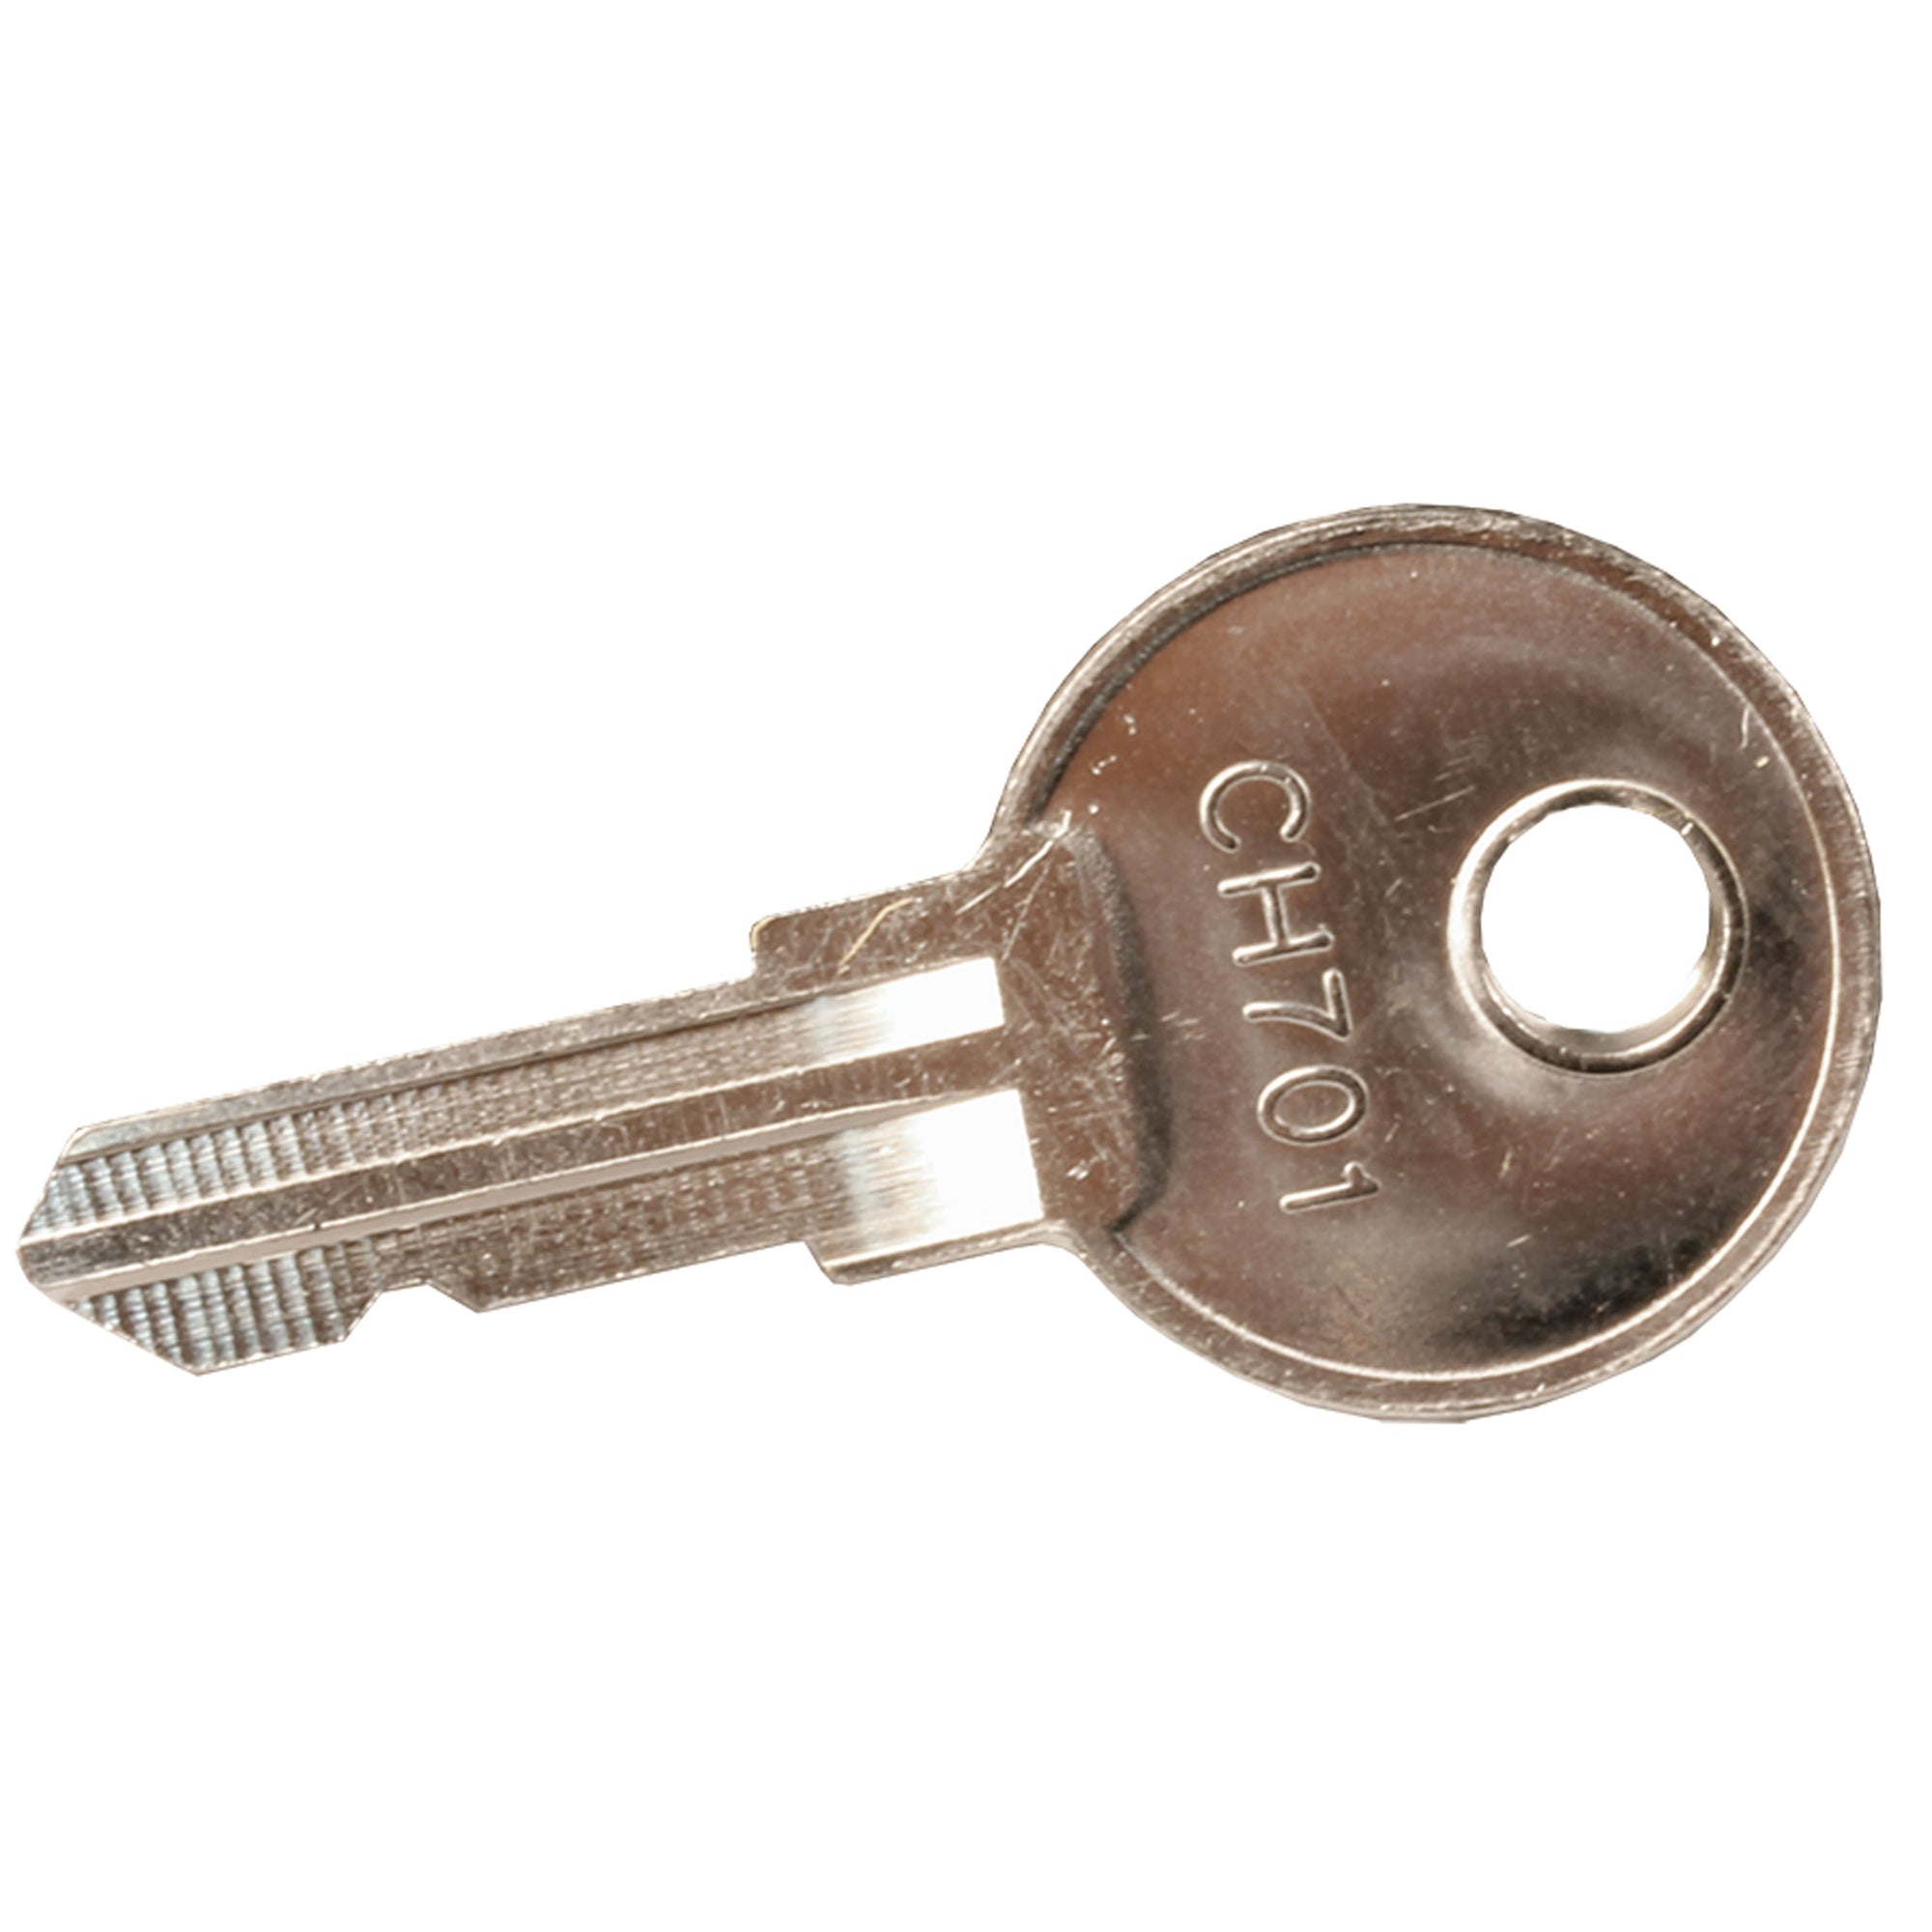 JR Products CH701-A Replacement Hudson/Hurd Key 701